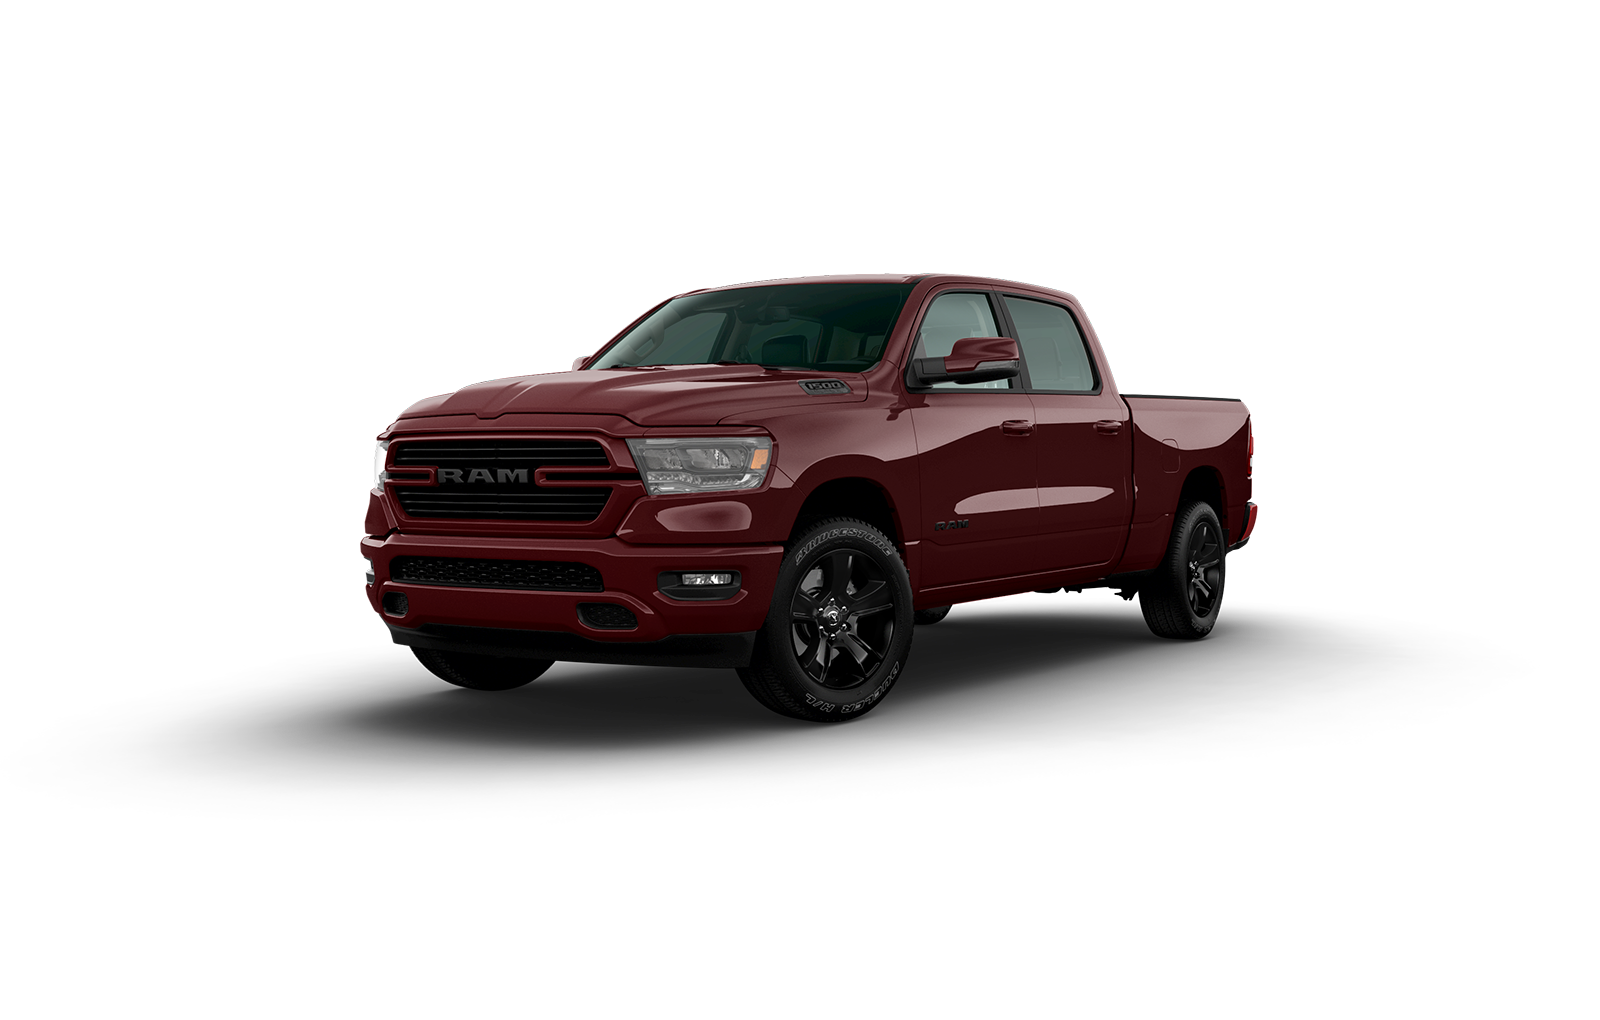 The 2023 Ram 1500 Price in the United States